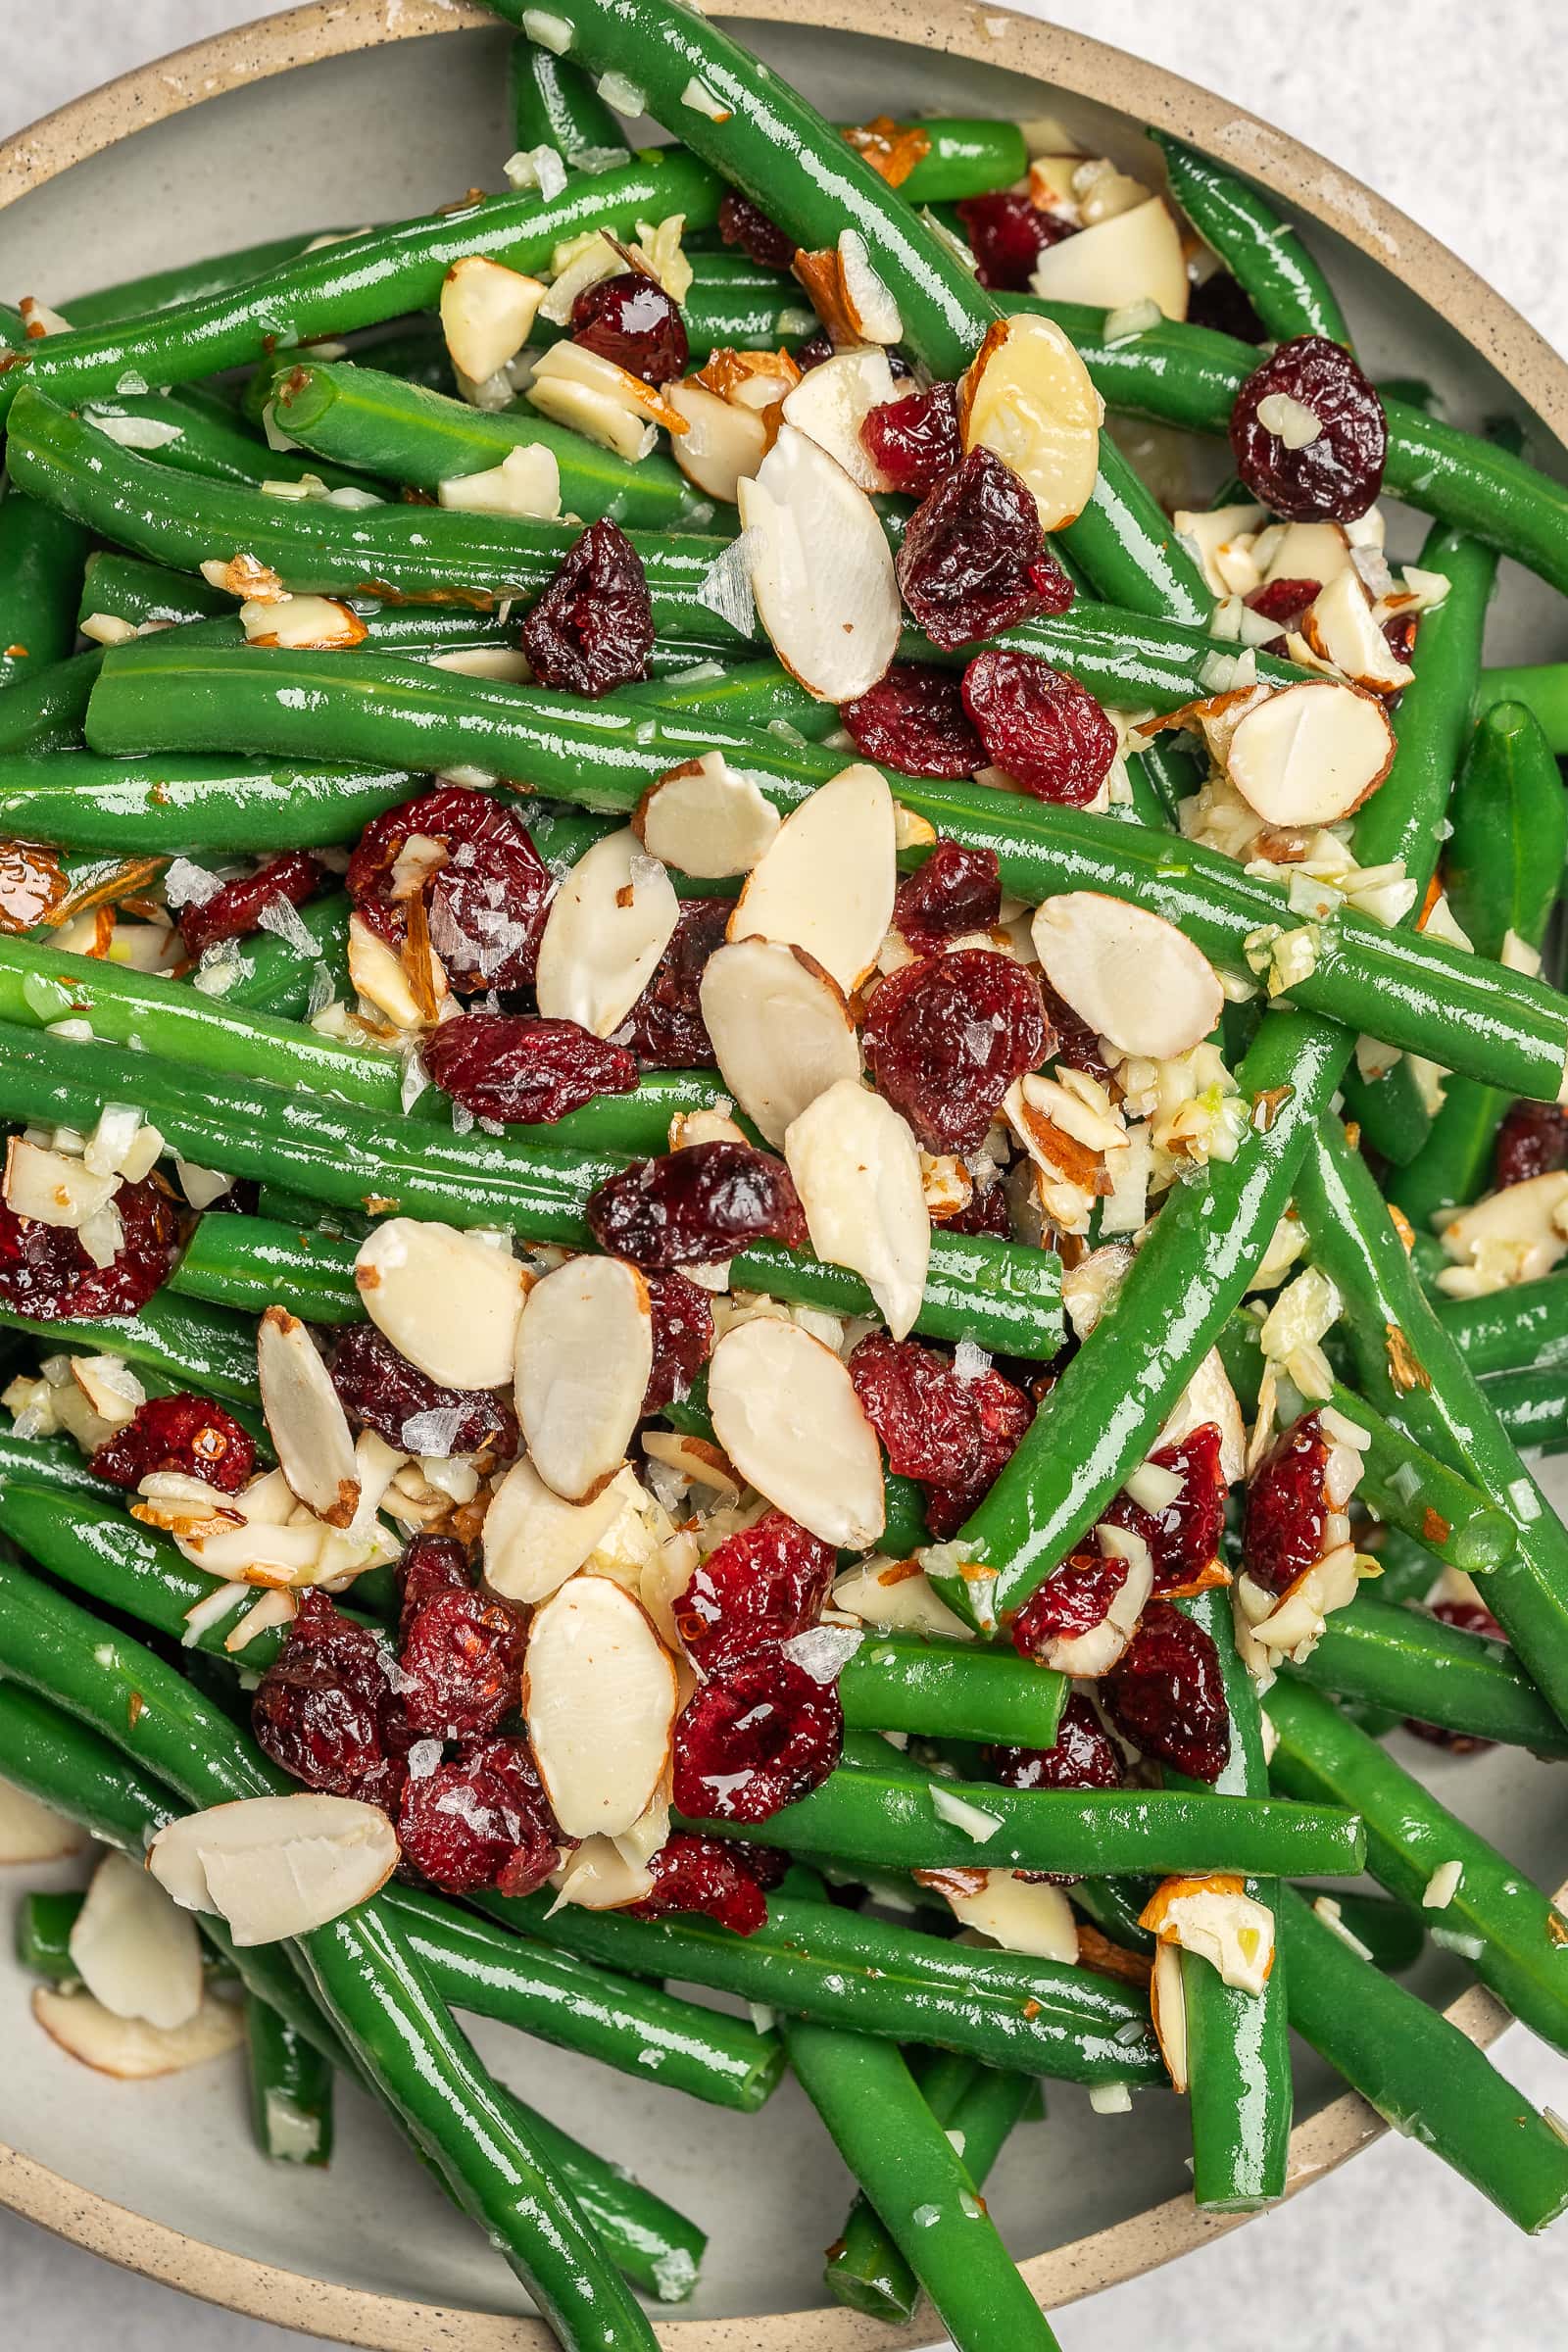 Garlic green beans garnished with cranberries and almonds on a serving dish.